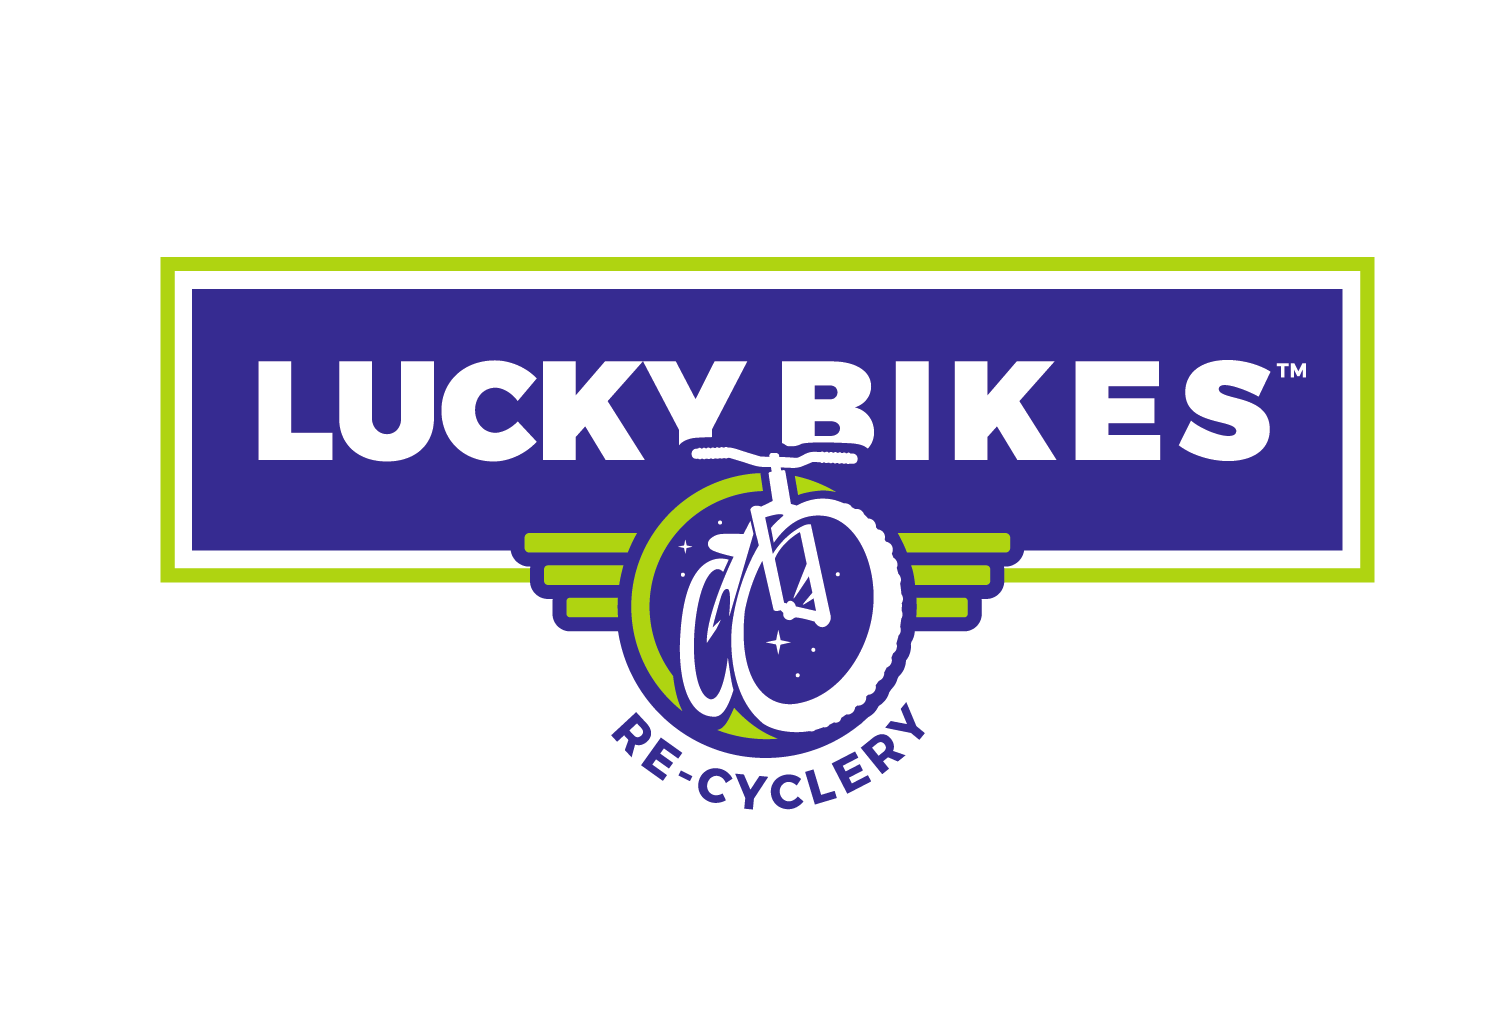 Lucky Bikes Re-Cyclery